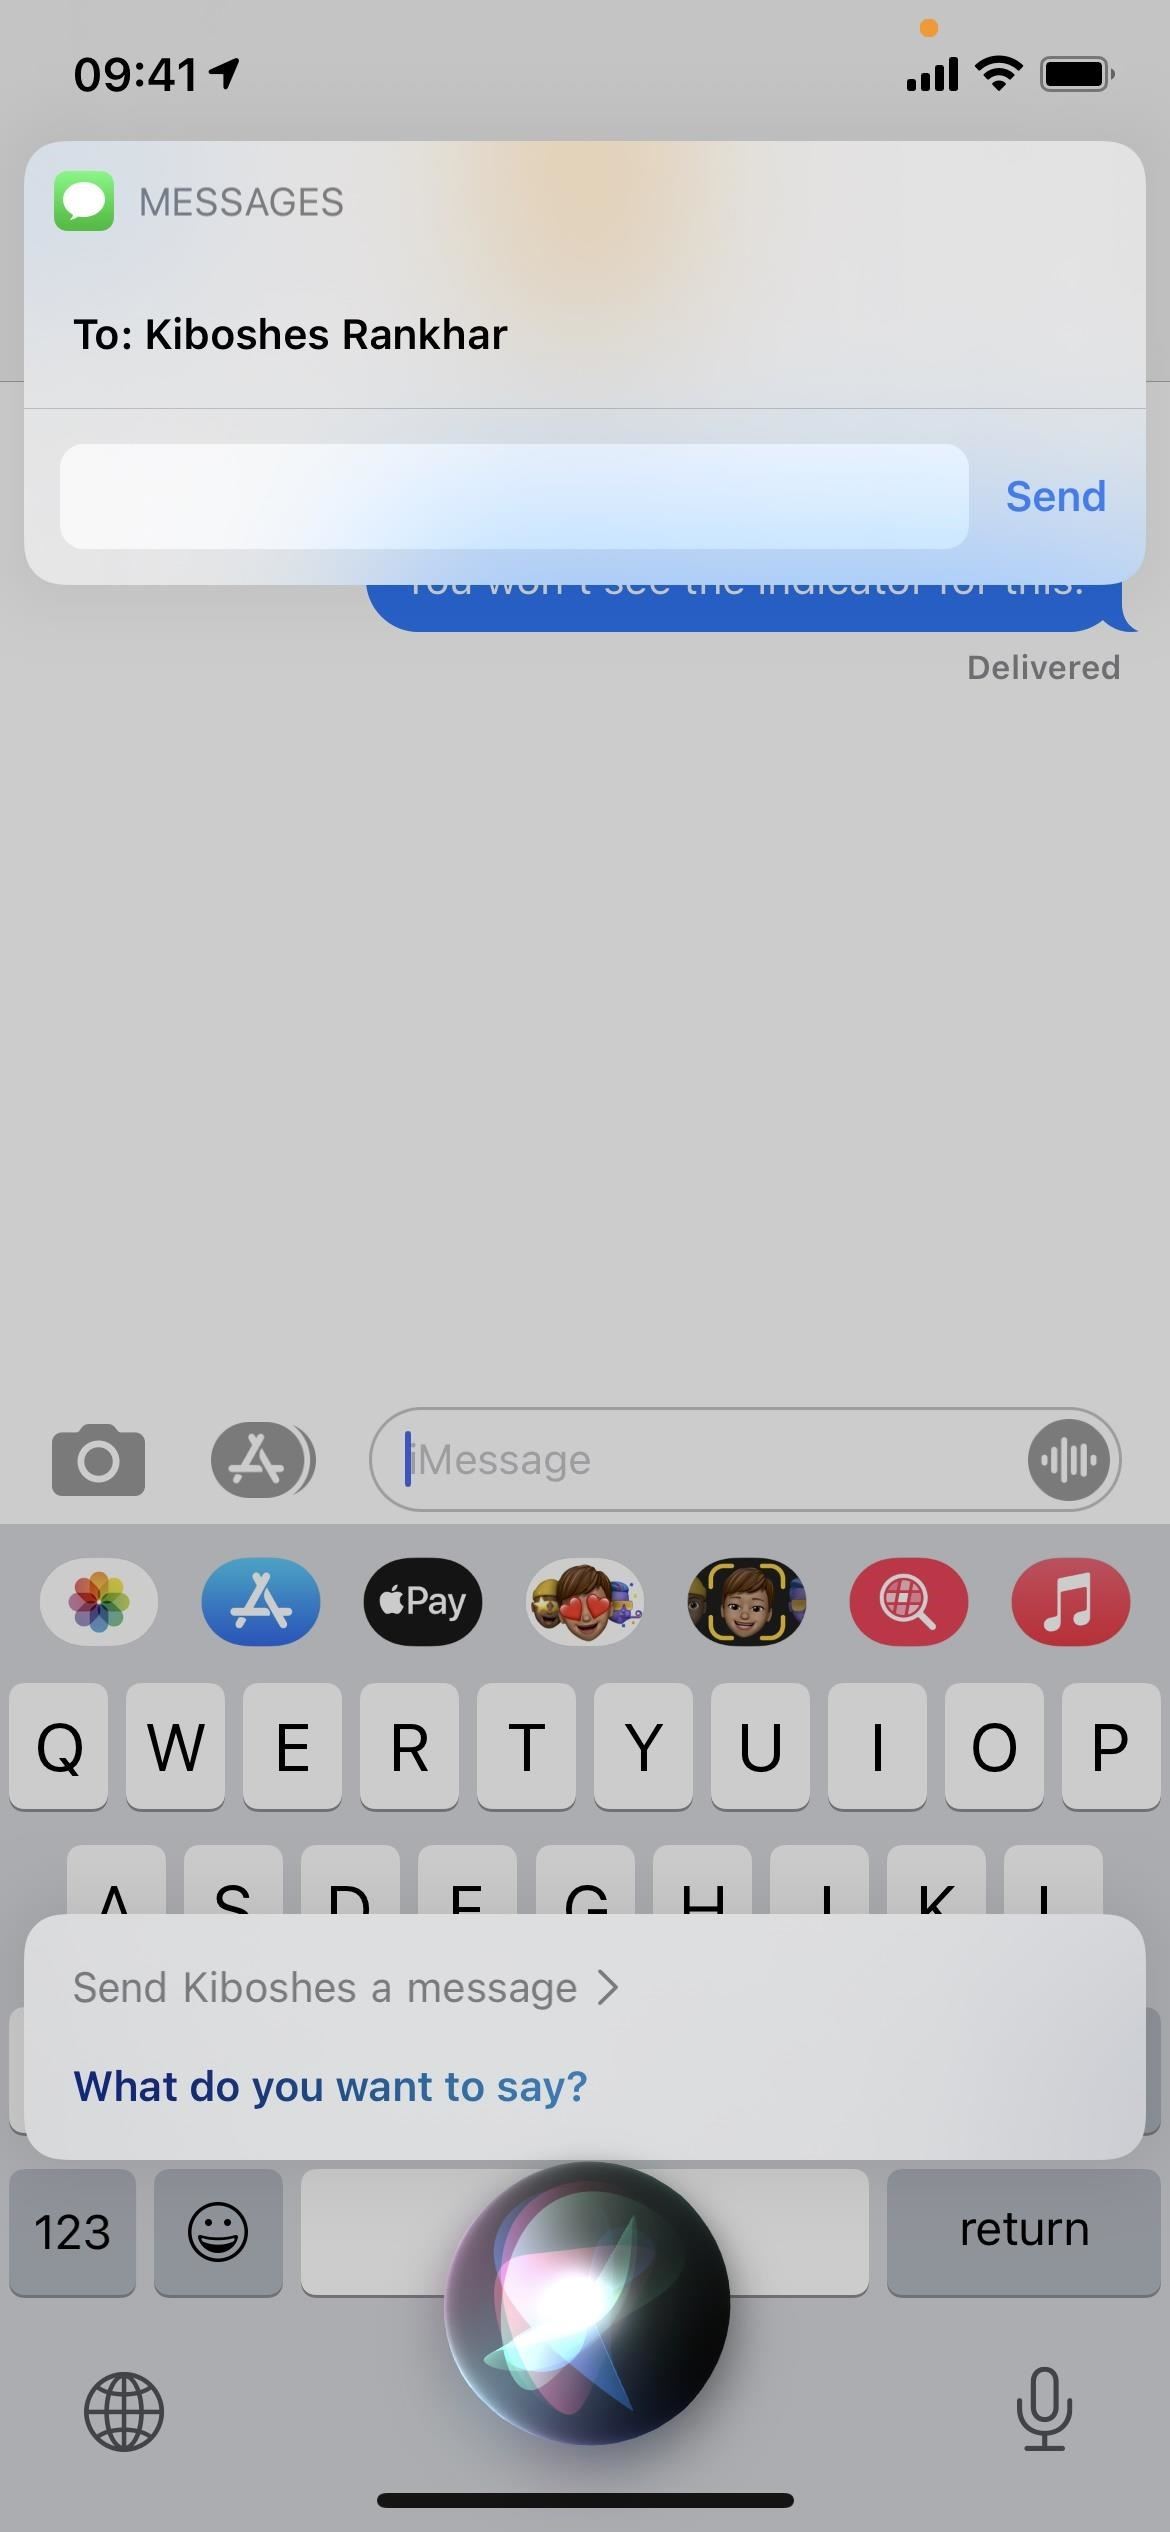 How to Disable the iMessage Typing Bubble Indicator So Others Don't Know  You're Currently Active in the Chat « iOS & iPhone :: Gadget Hacks